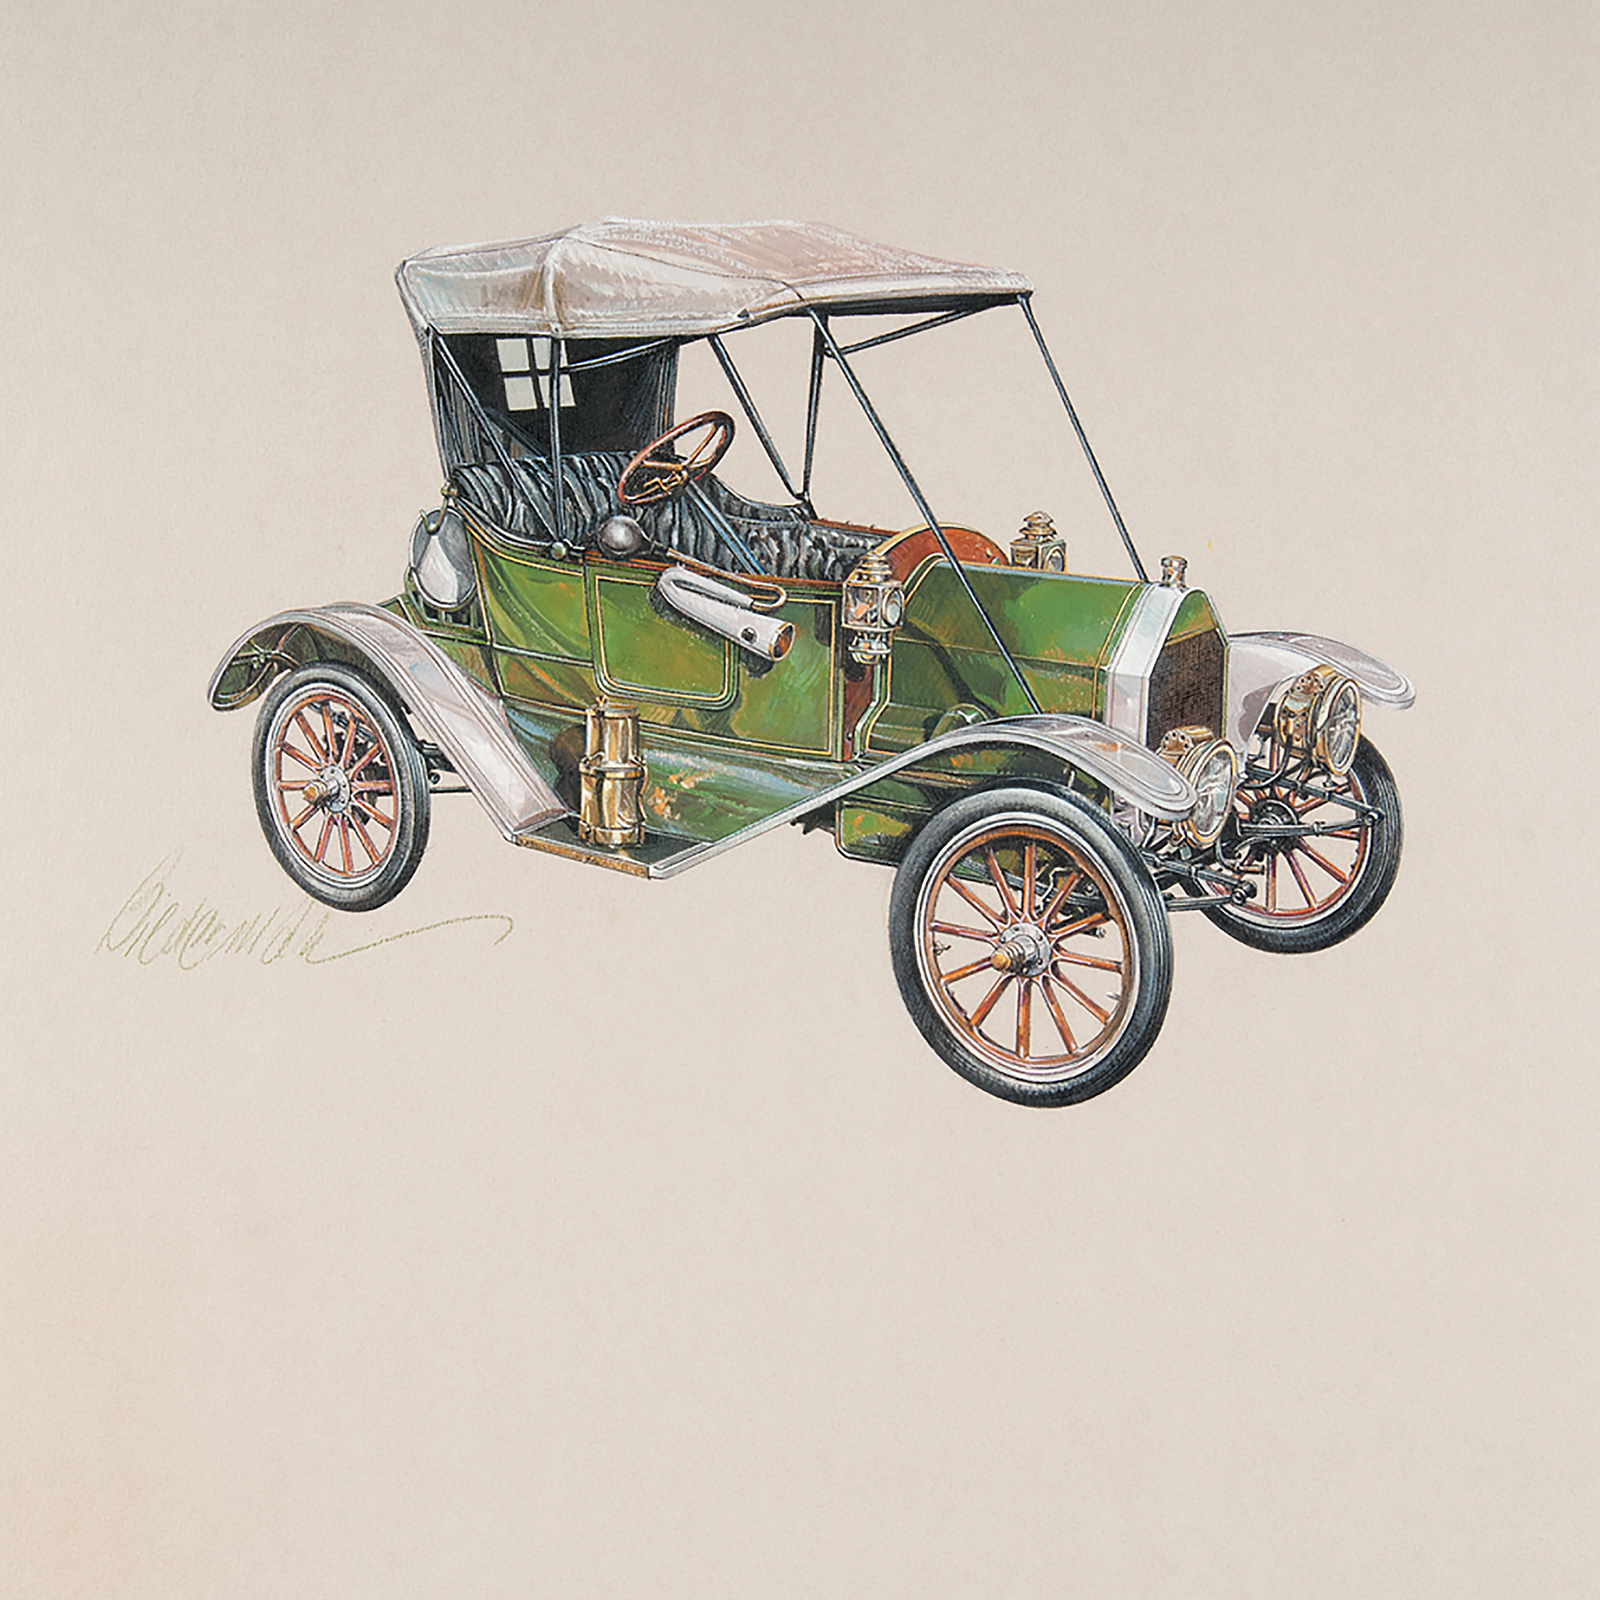 1912 Maxwell Runabout: Illustrated by Jerome D. Biederman